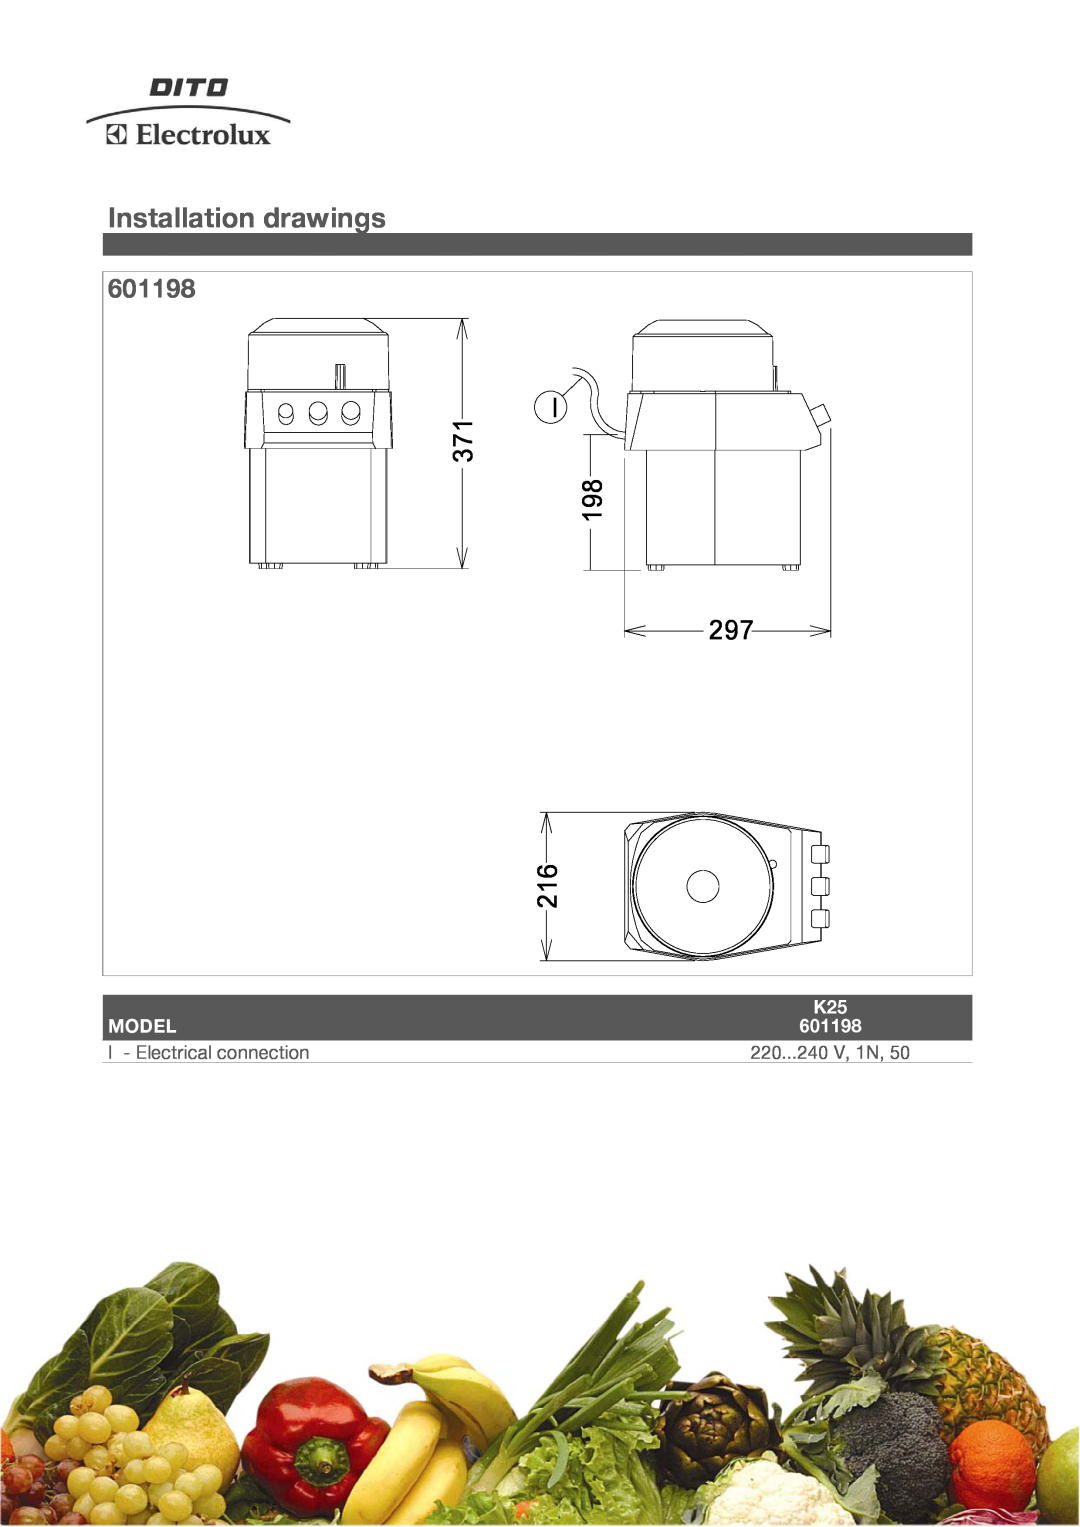 Electrolux 601198 manual Installation drawings, I 371 297, Model, I - Electrical connection, 220...240 V, 1N 